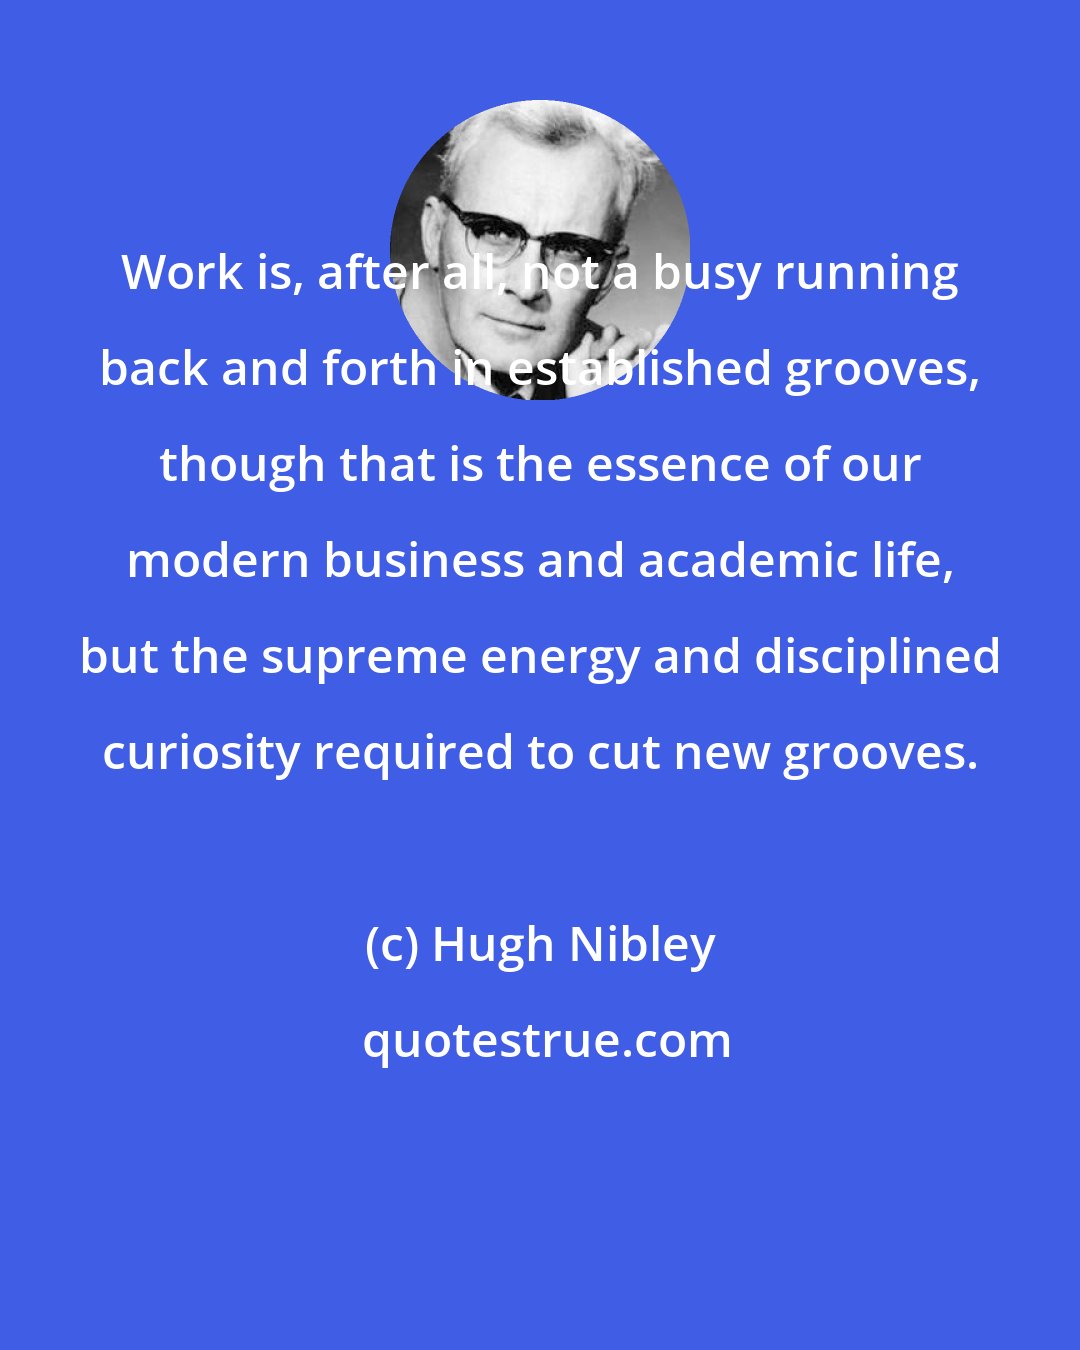 Hugh Nibley: Work is, after all, not a busy running back and forth in established grooves, though that is the essence of our modern business and academic life, but the supreme energy and disciplined curiosity required to cut new grooves.